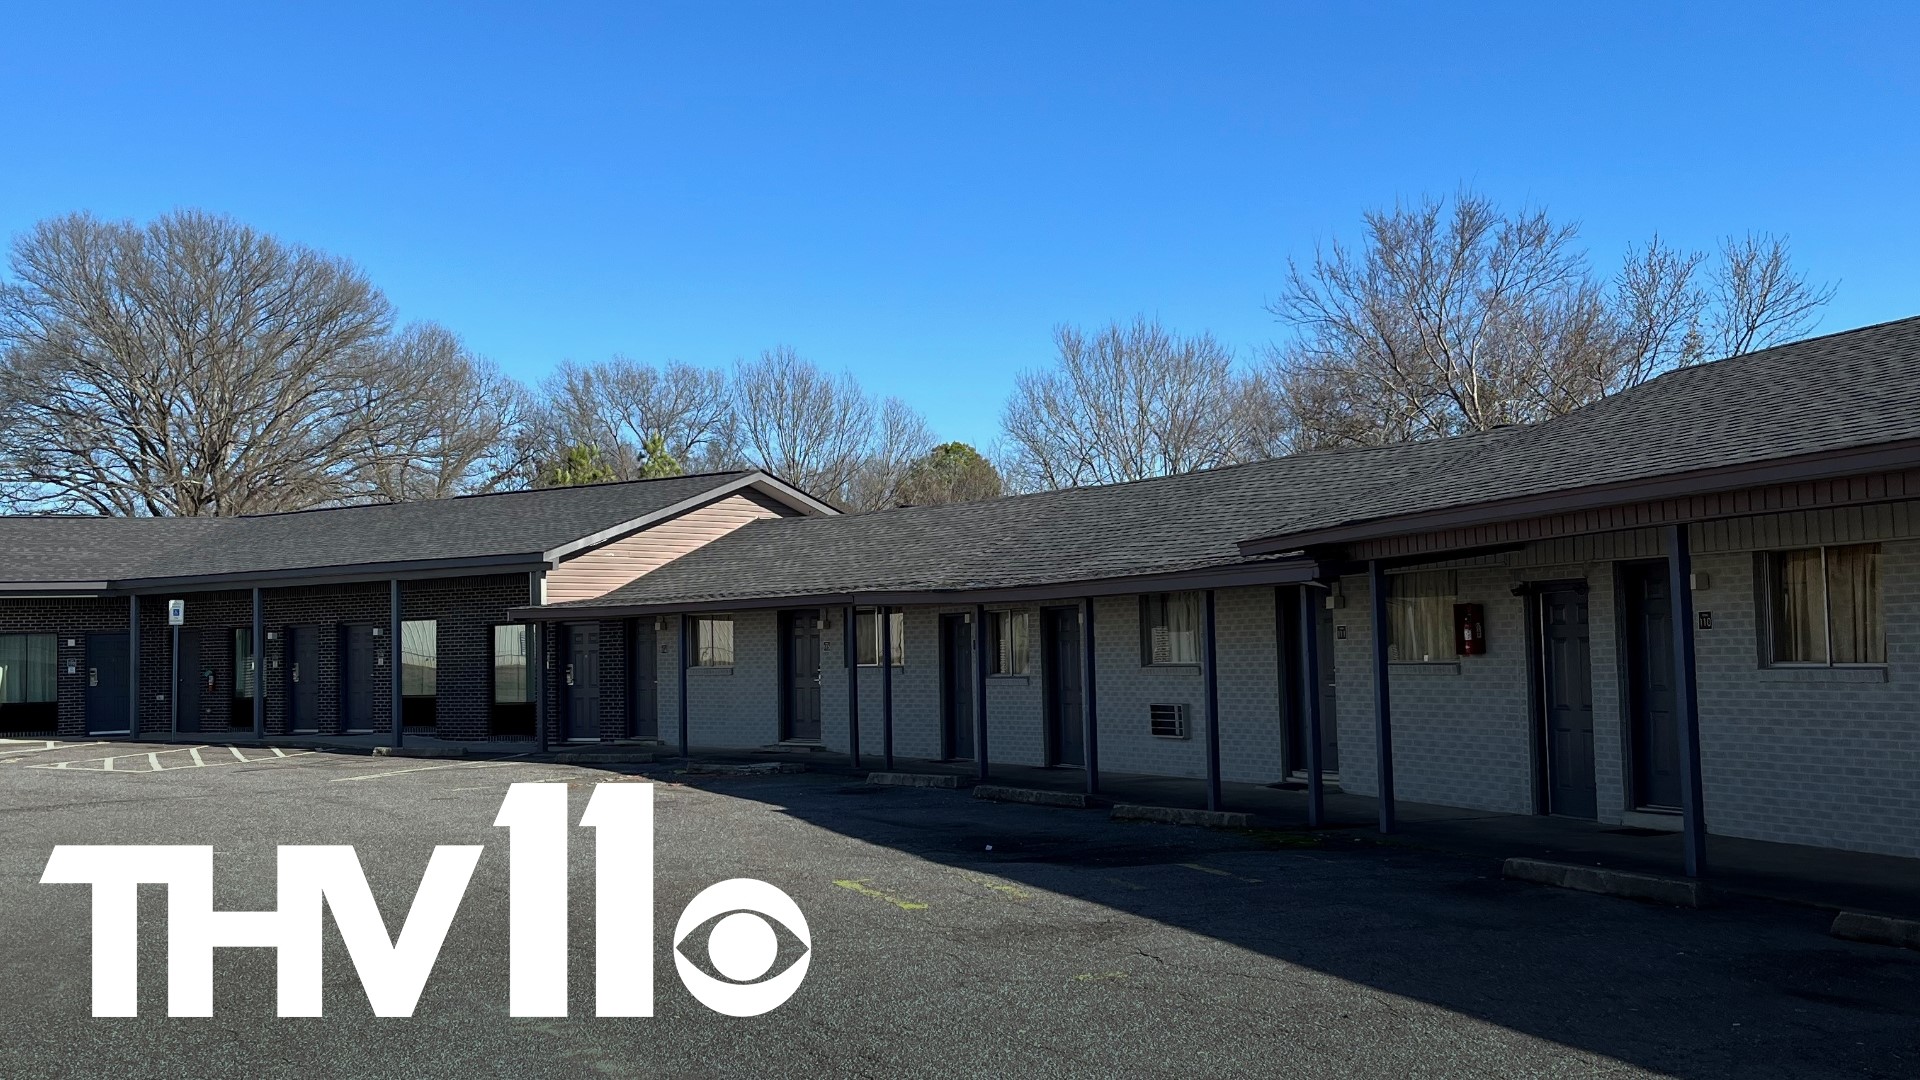 There will soon be a new emergency shelter opening up for families and children in Conway who have no other place to go.